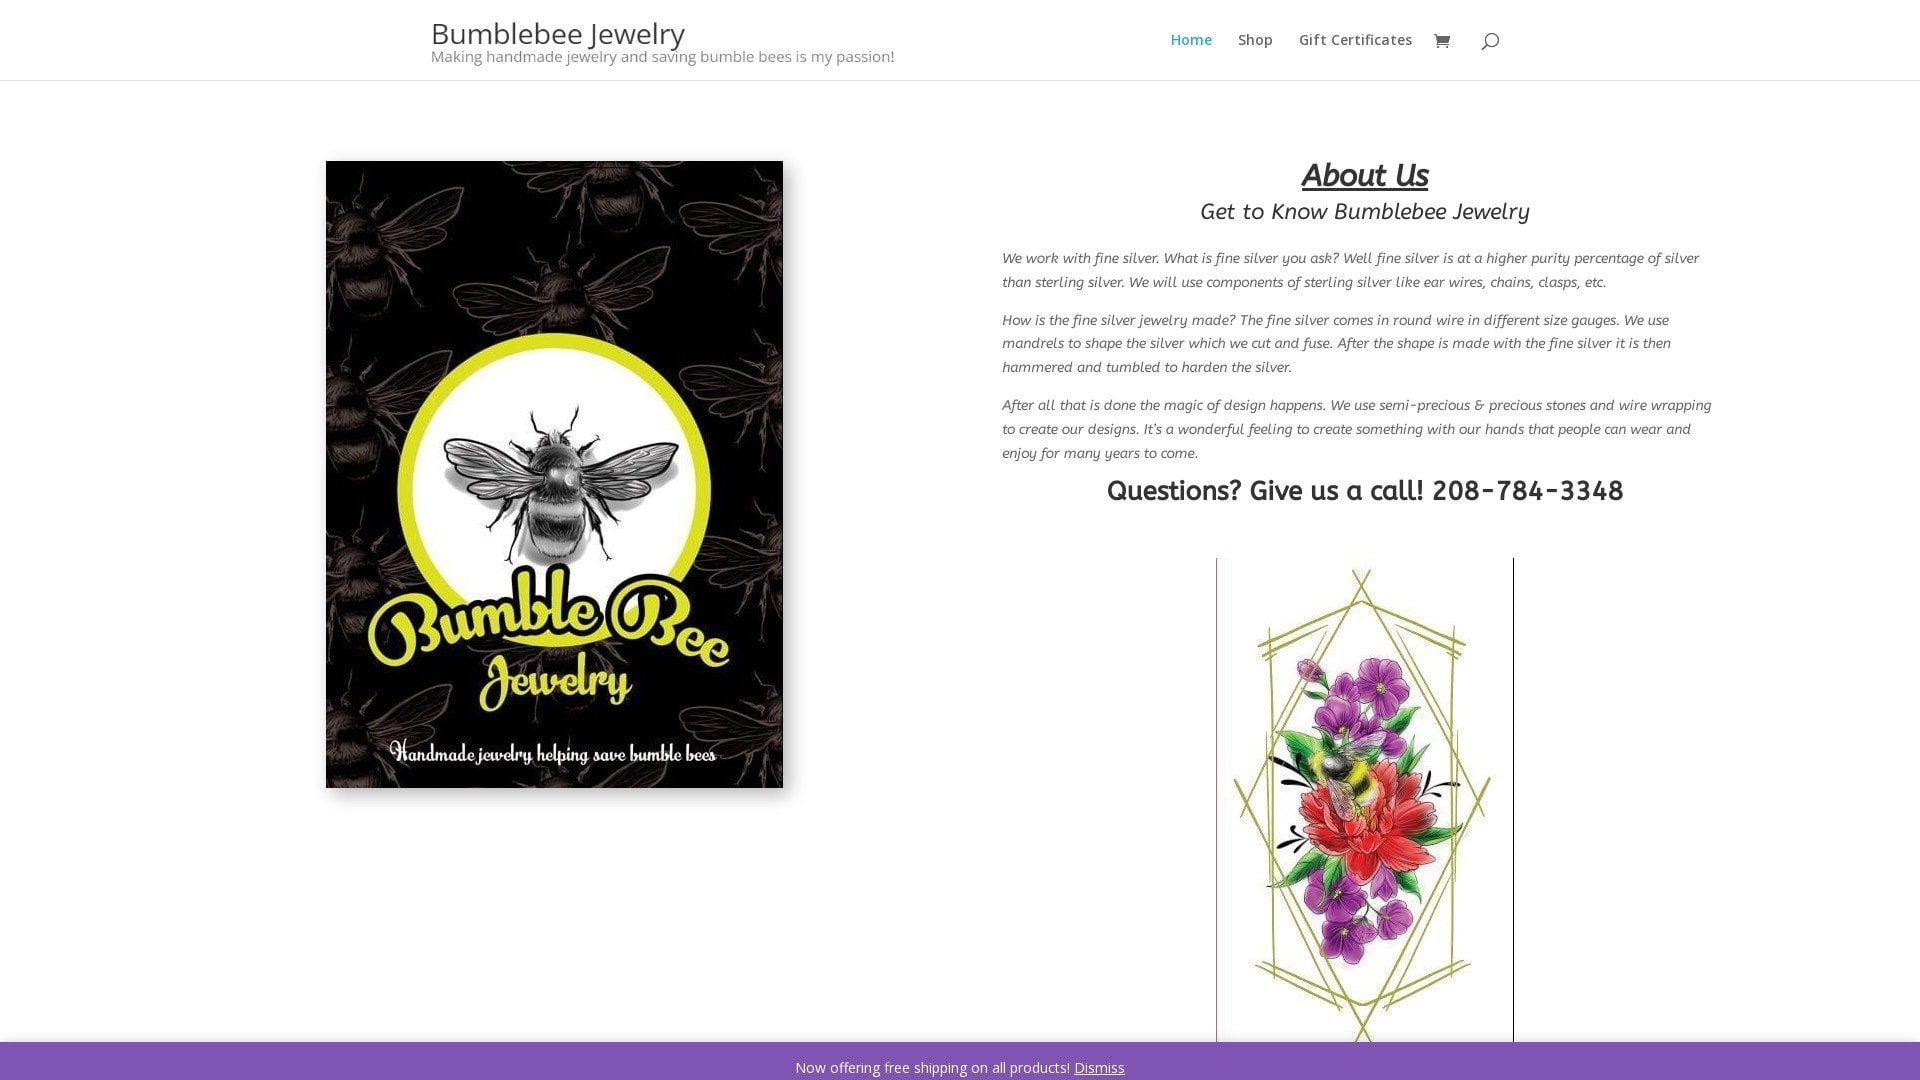 Bumblebee Jewelry Making Handmade Jewelry And Saving Bumble Bees Is My Passion!